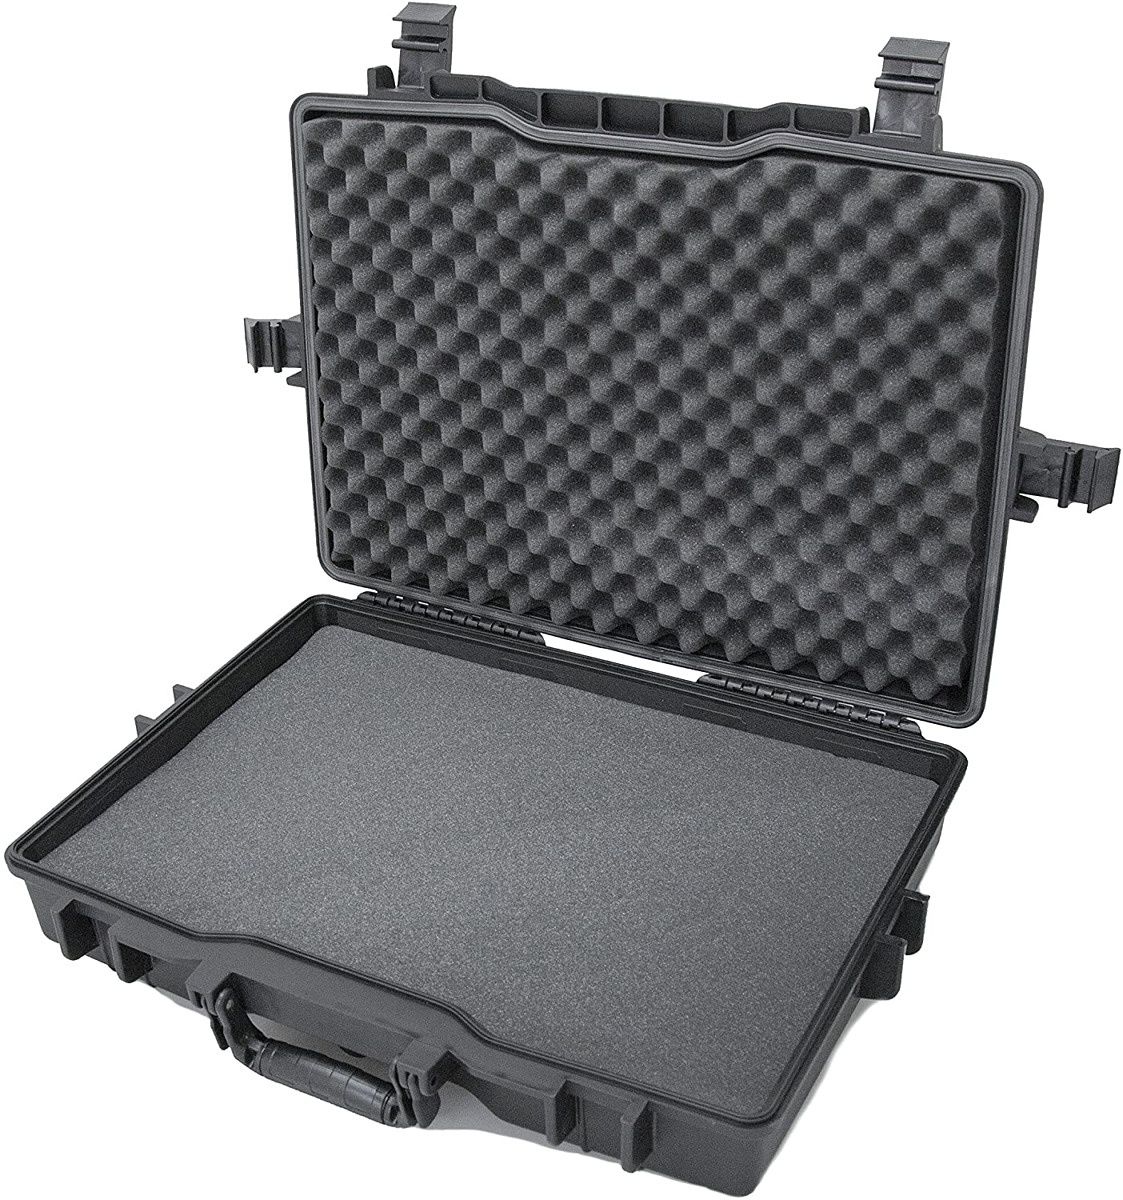 Not many will need this, but the Casematix Laptop Bag is a big, heavy bag with a hard shell and tons of foam padding you can add or remove to fit different laptops and get more protection, plus it's water resistant.  If you need ultimate protection, this is it.